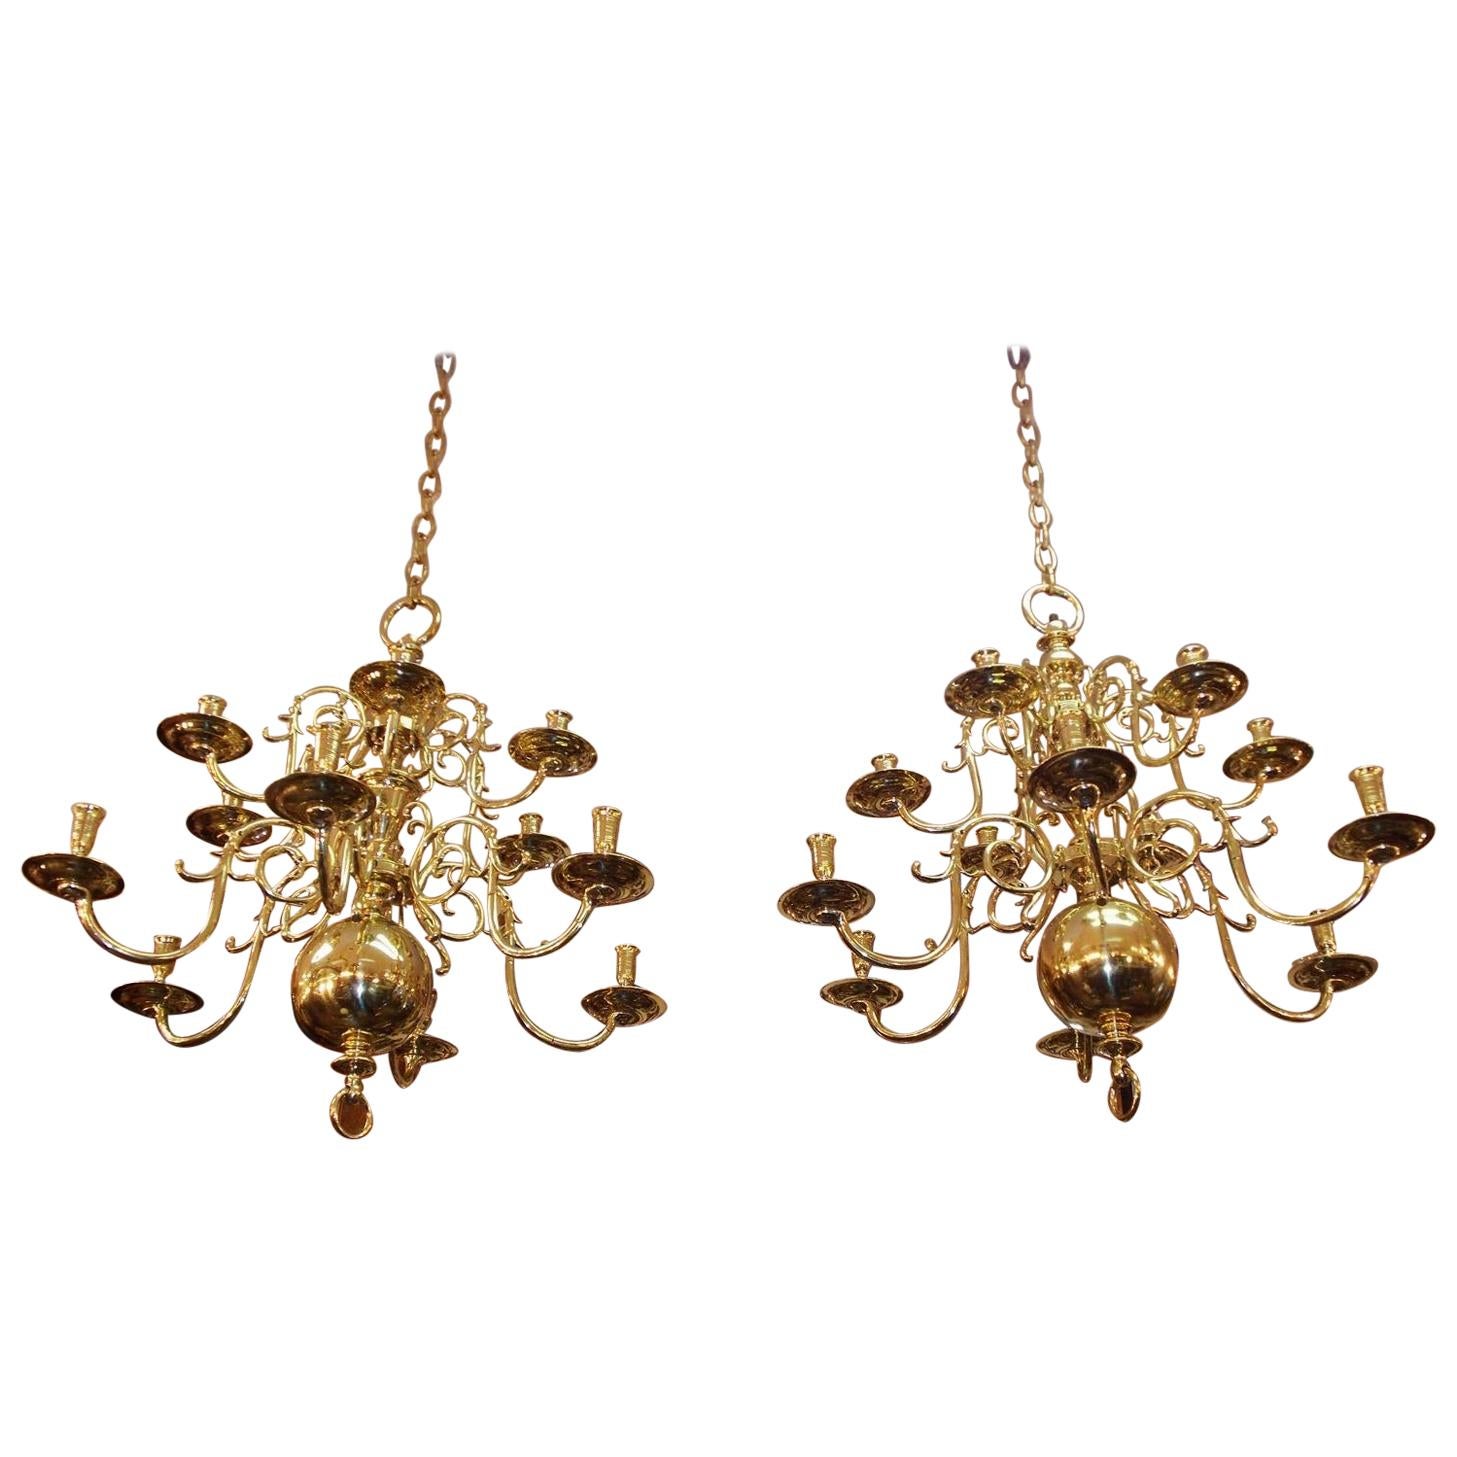 Pair of Dutch Colonial Two-Tiered Bulbous and Scrolled Chandeliers, Circa 1750